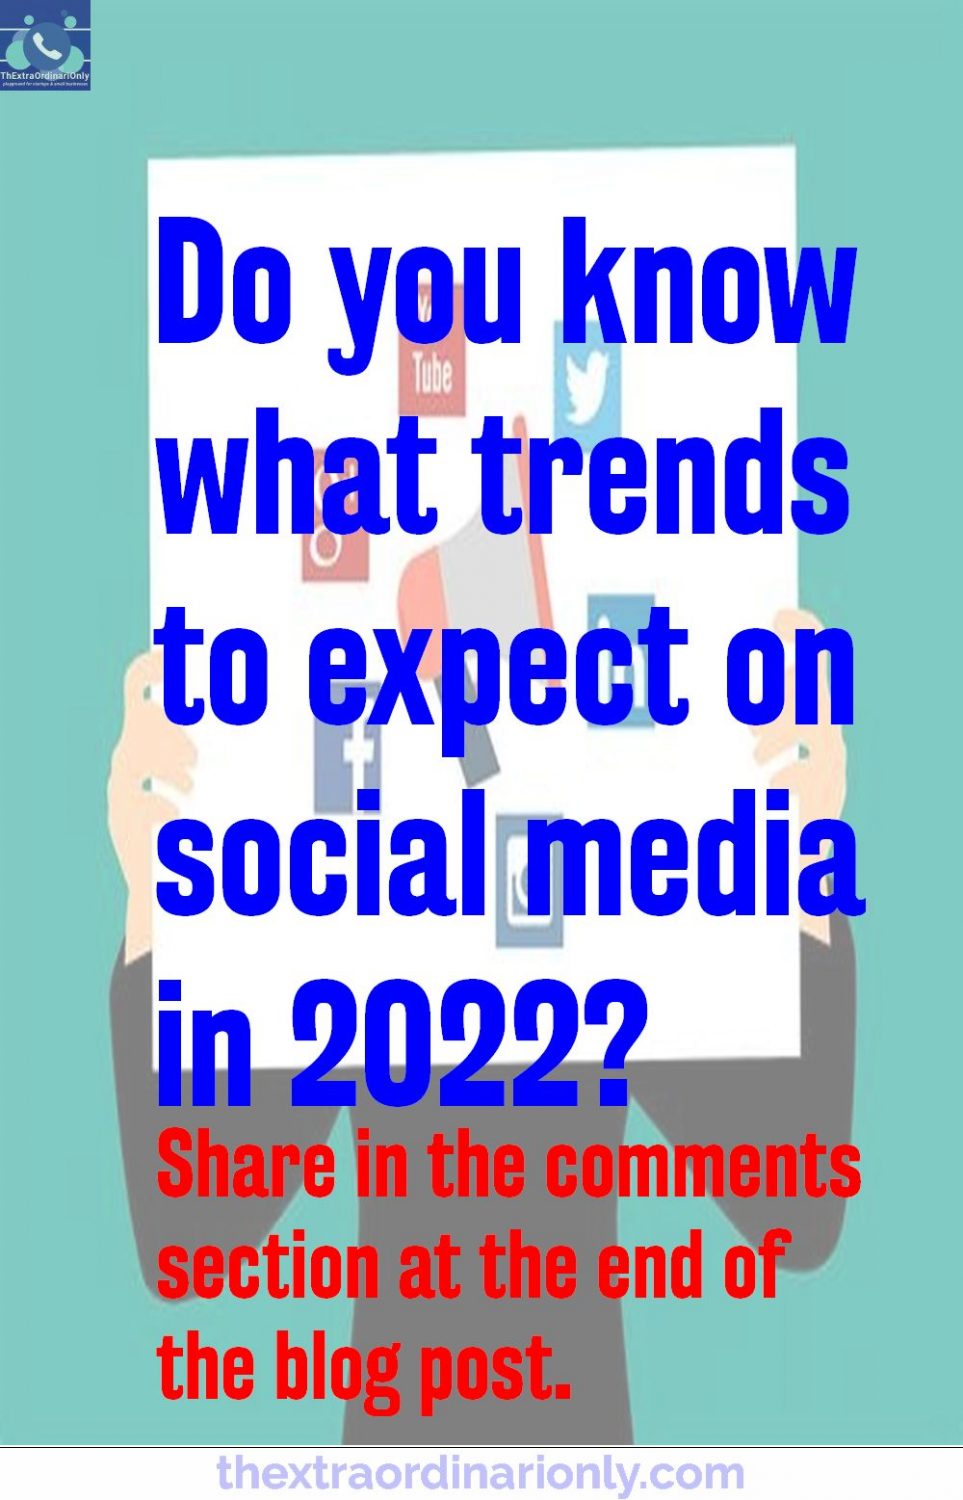 do you know current social media trends to expect in 2022